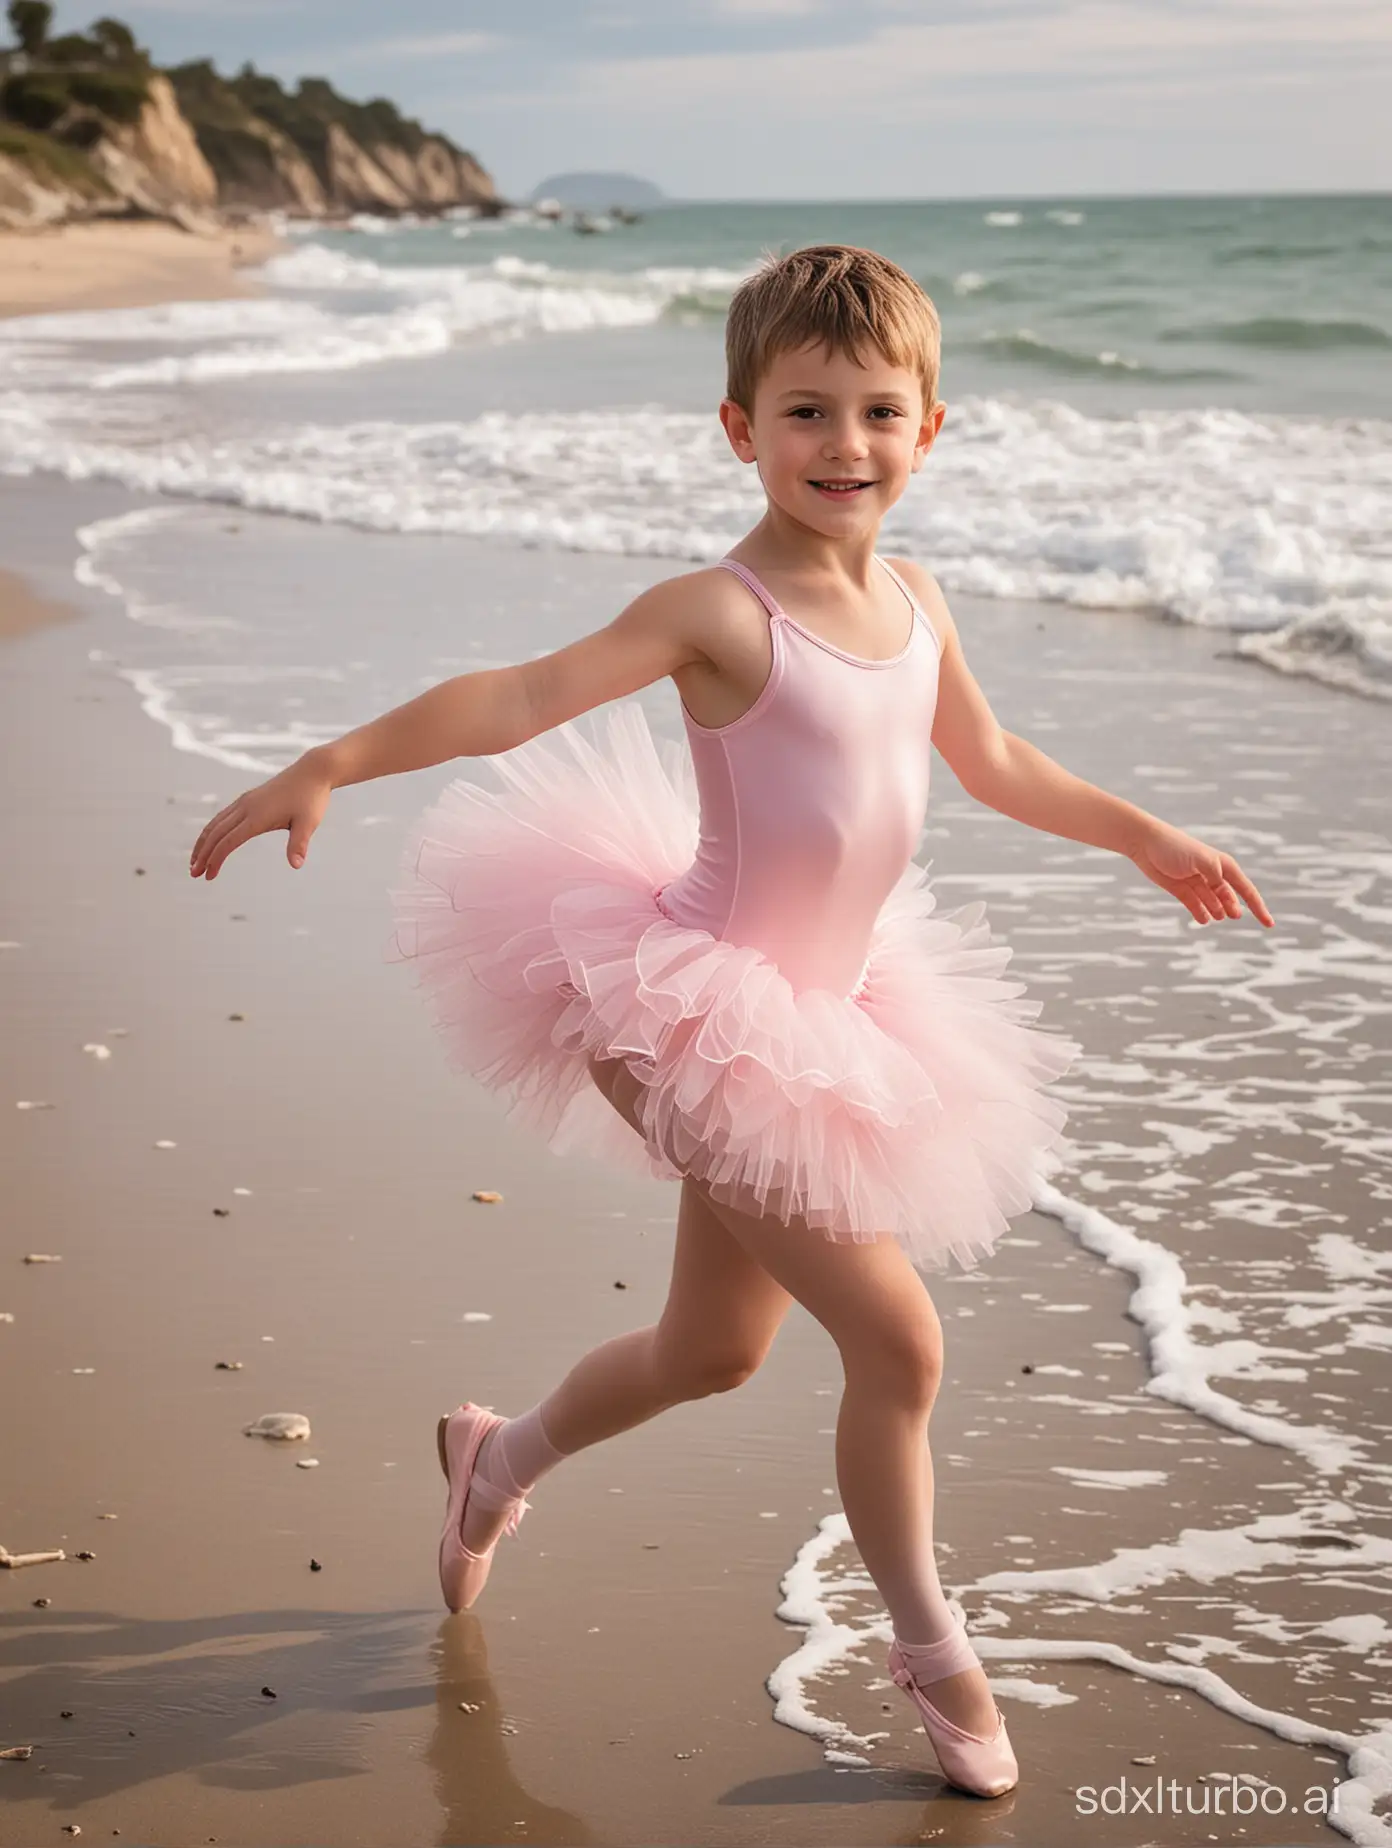 A short-haired 8-year-old boy running along a beach shoreline in a silky pink ballerina leotard and frilly tutu, the photograph is captioned “When Kevin gets a day off school, be like…”